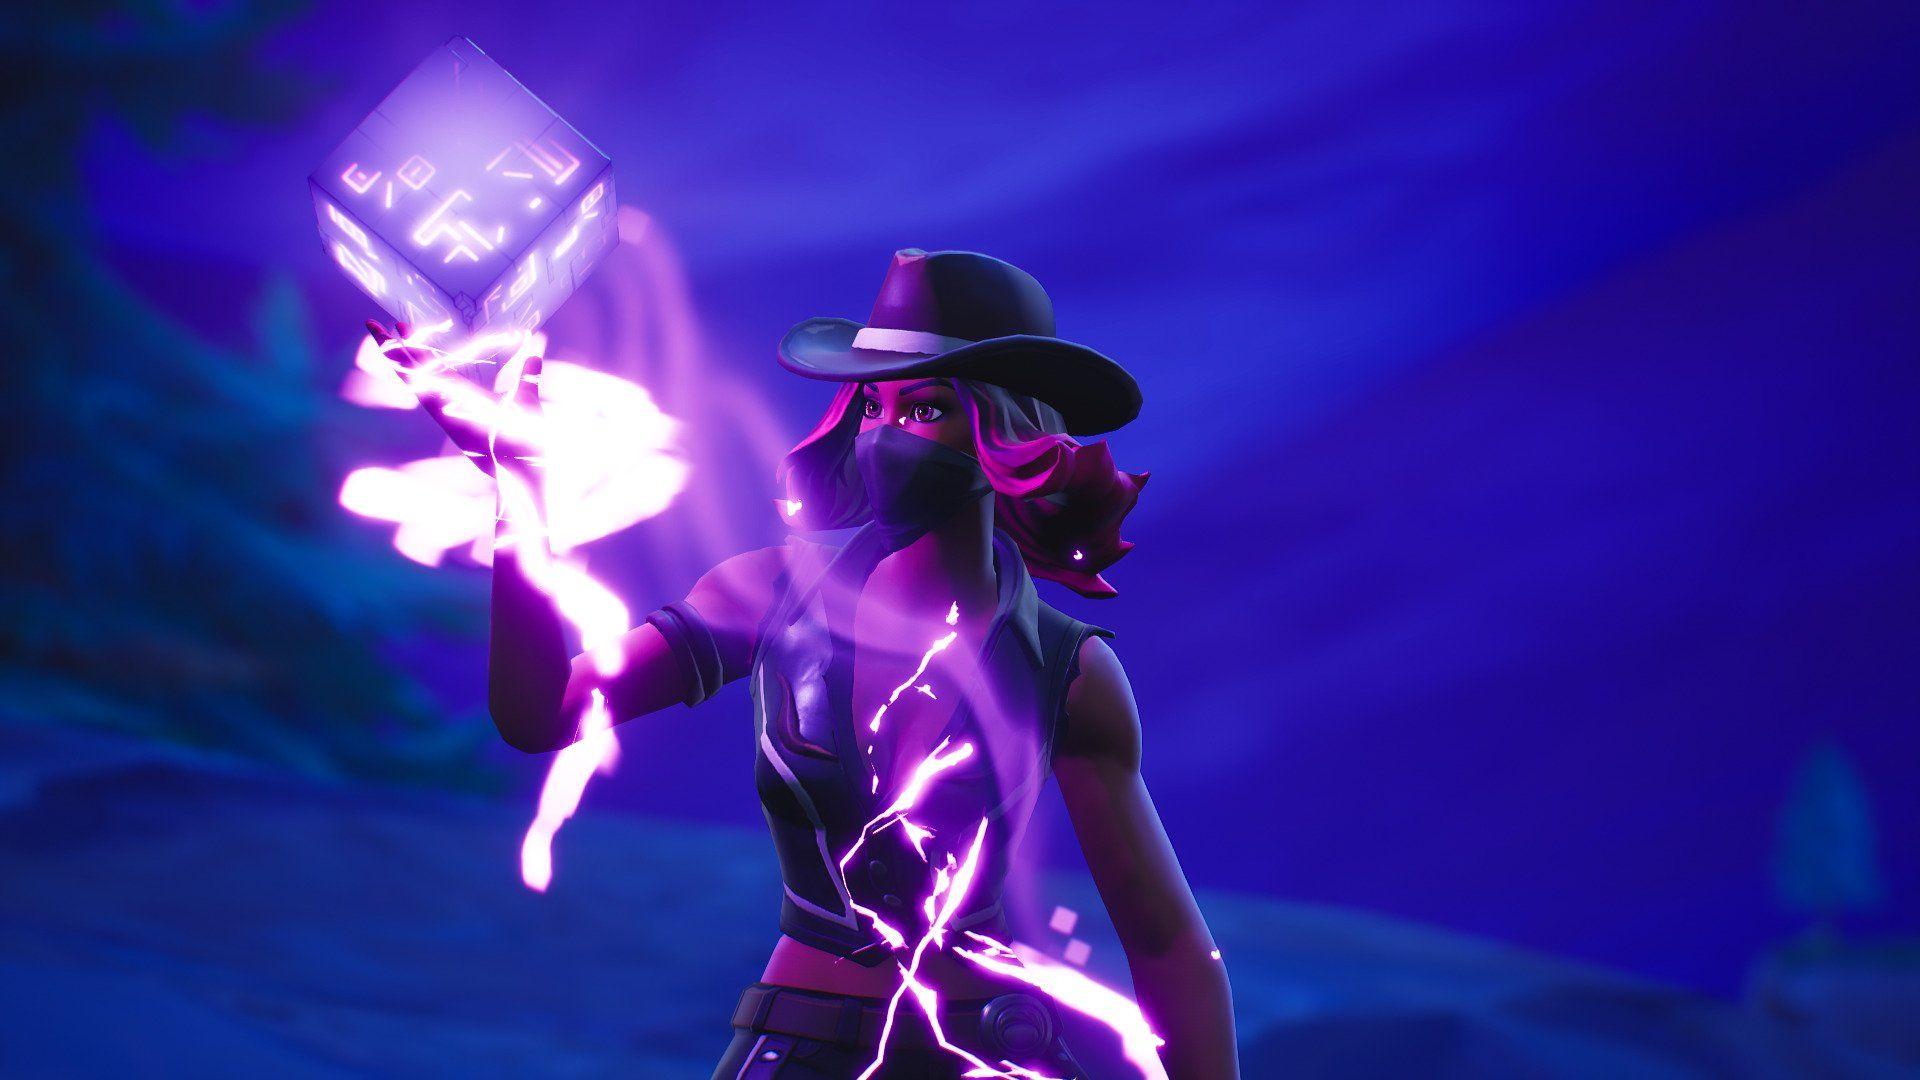 Calamity & Fortnite Cube by Davidbellver Wallpaper and Free